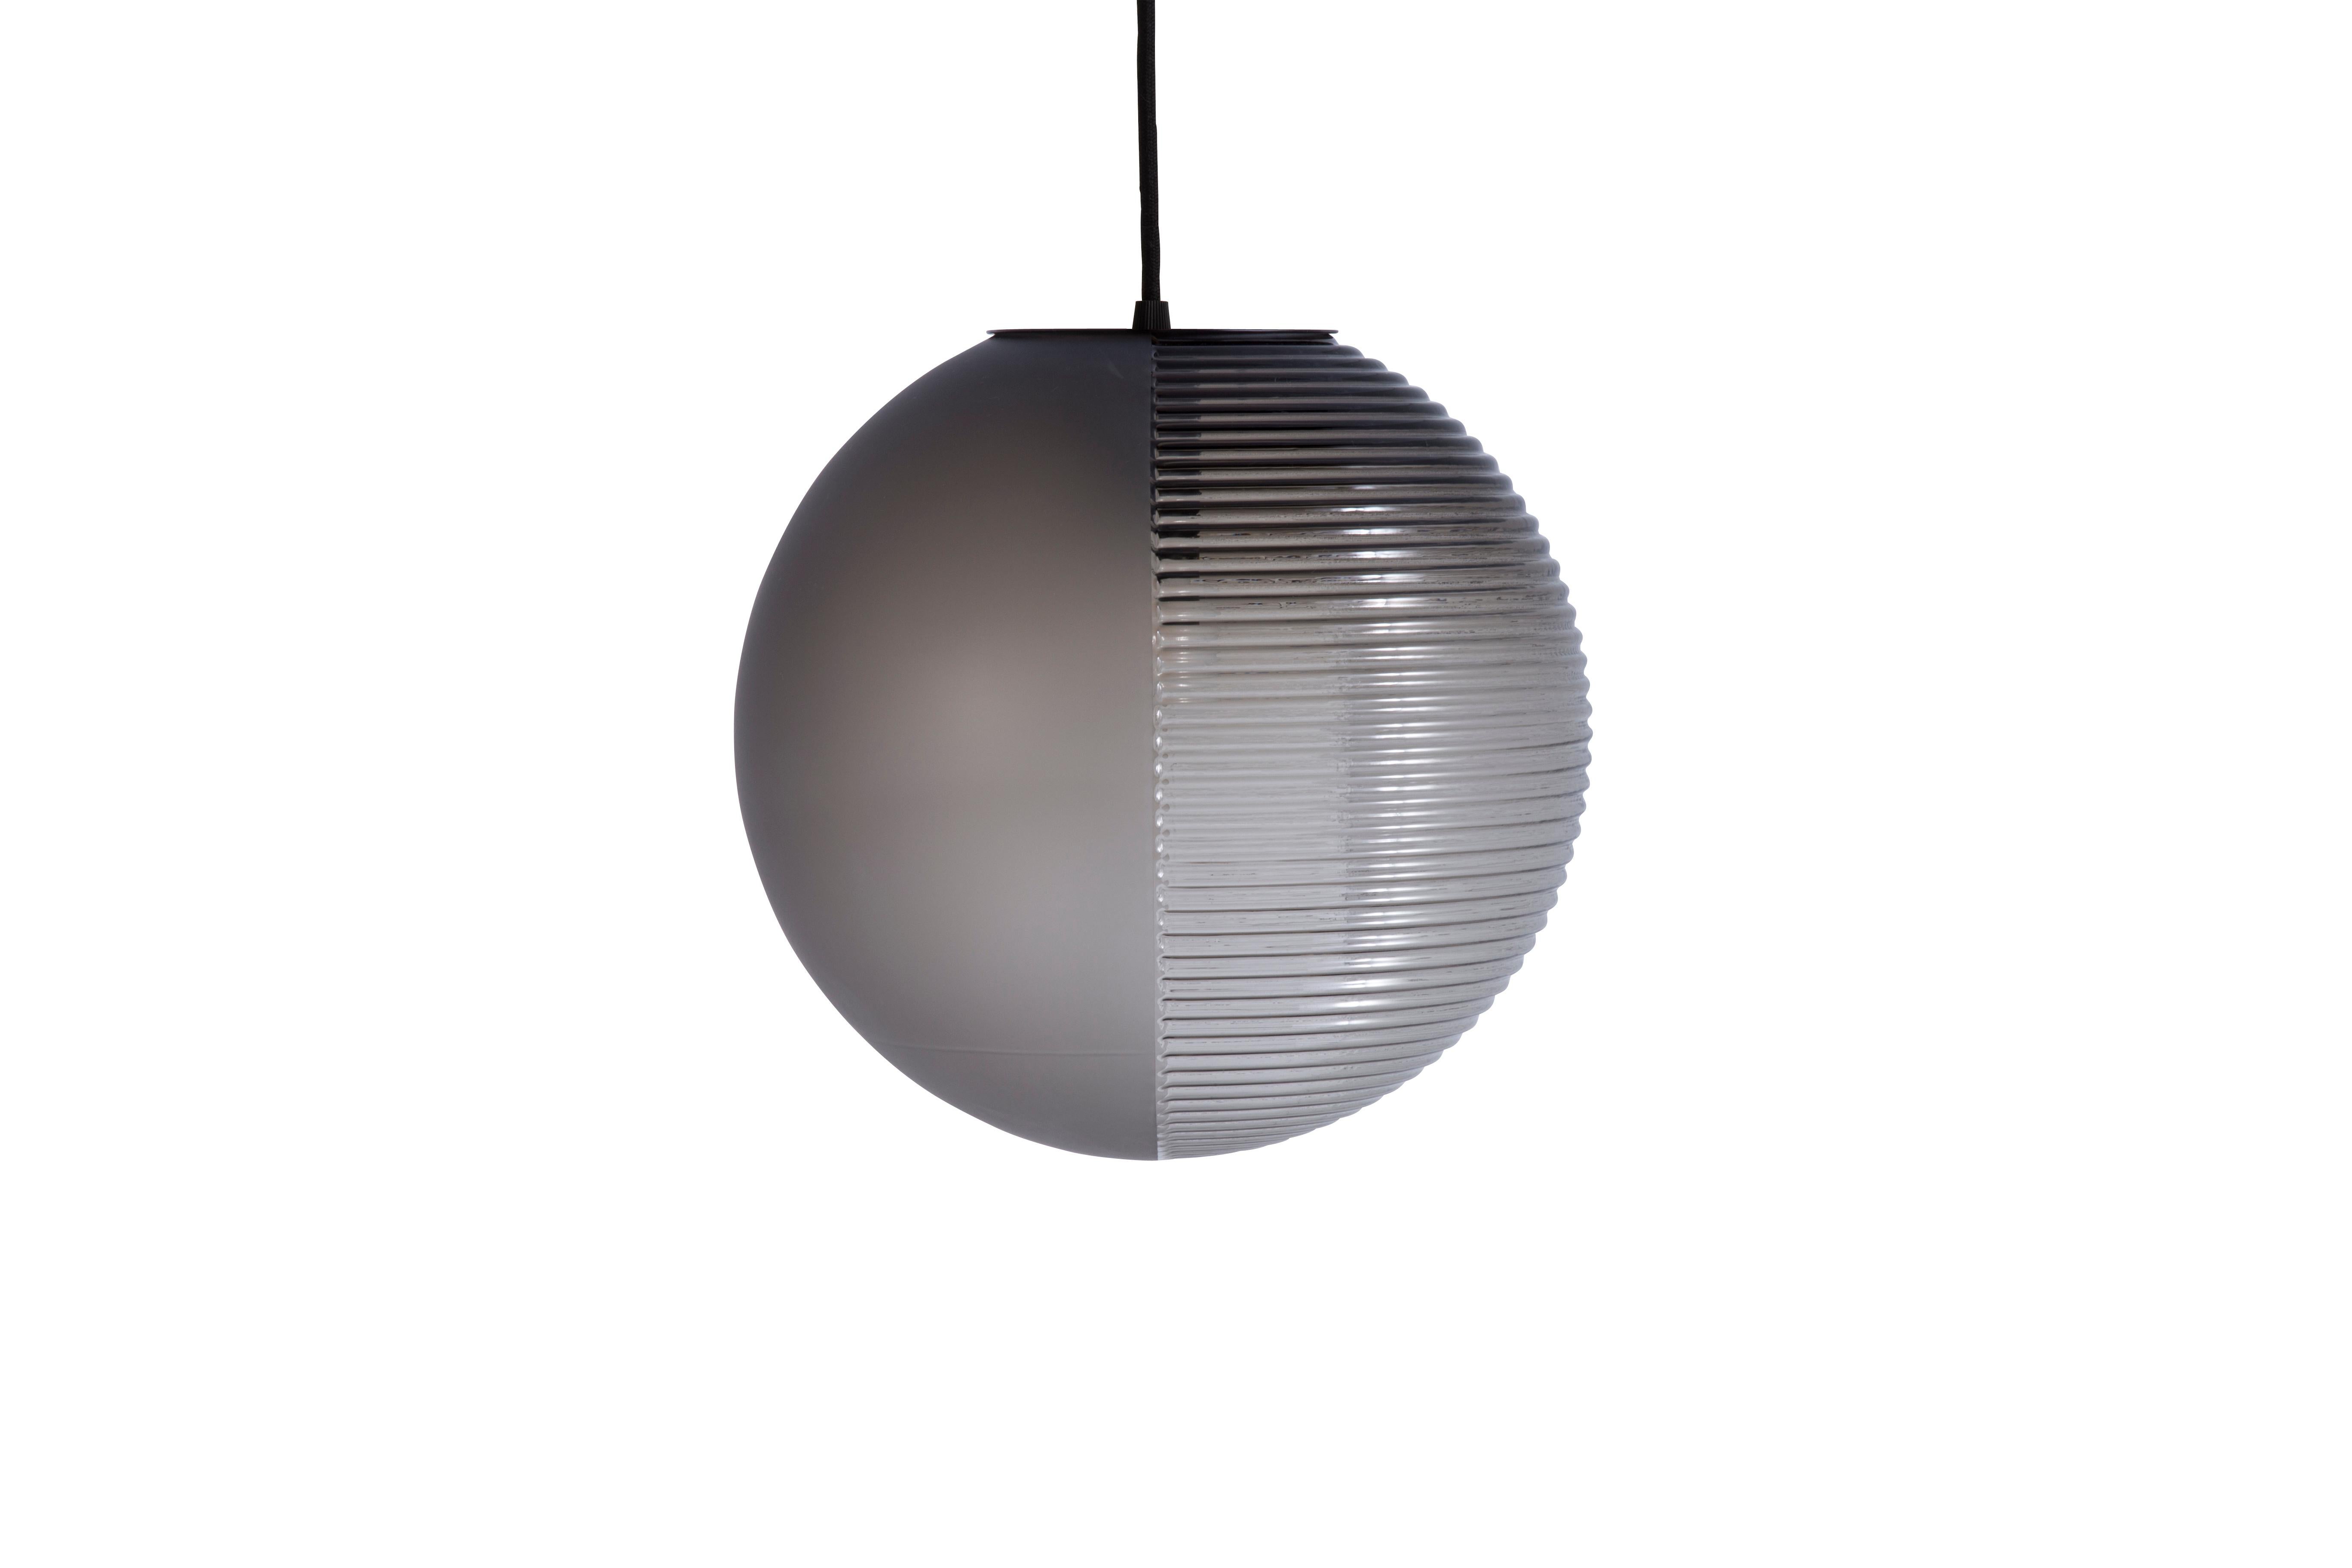 Stellar medium smoky grey Acetato smoky grey Pendant by Pulpo.
Dimensions: D31 x H320 cm
Materials: handblown glass coloured, stainless steel wire, textile cable.

Also available in different finishes: aubergine acetato aubergine, smoky grey